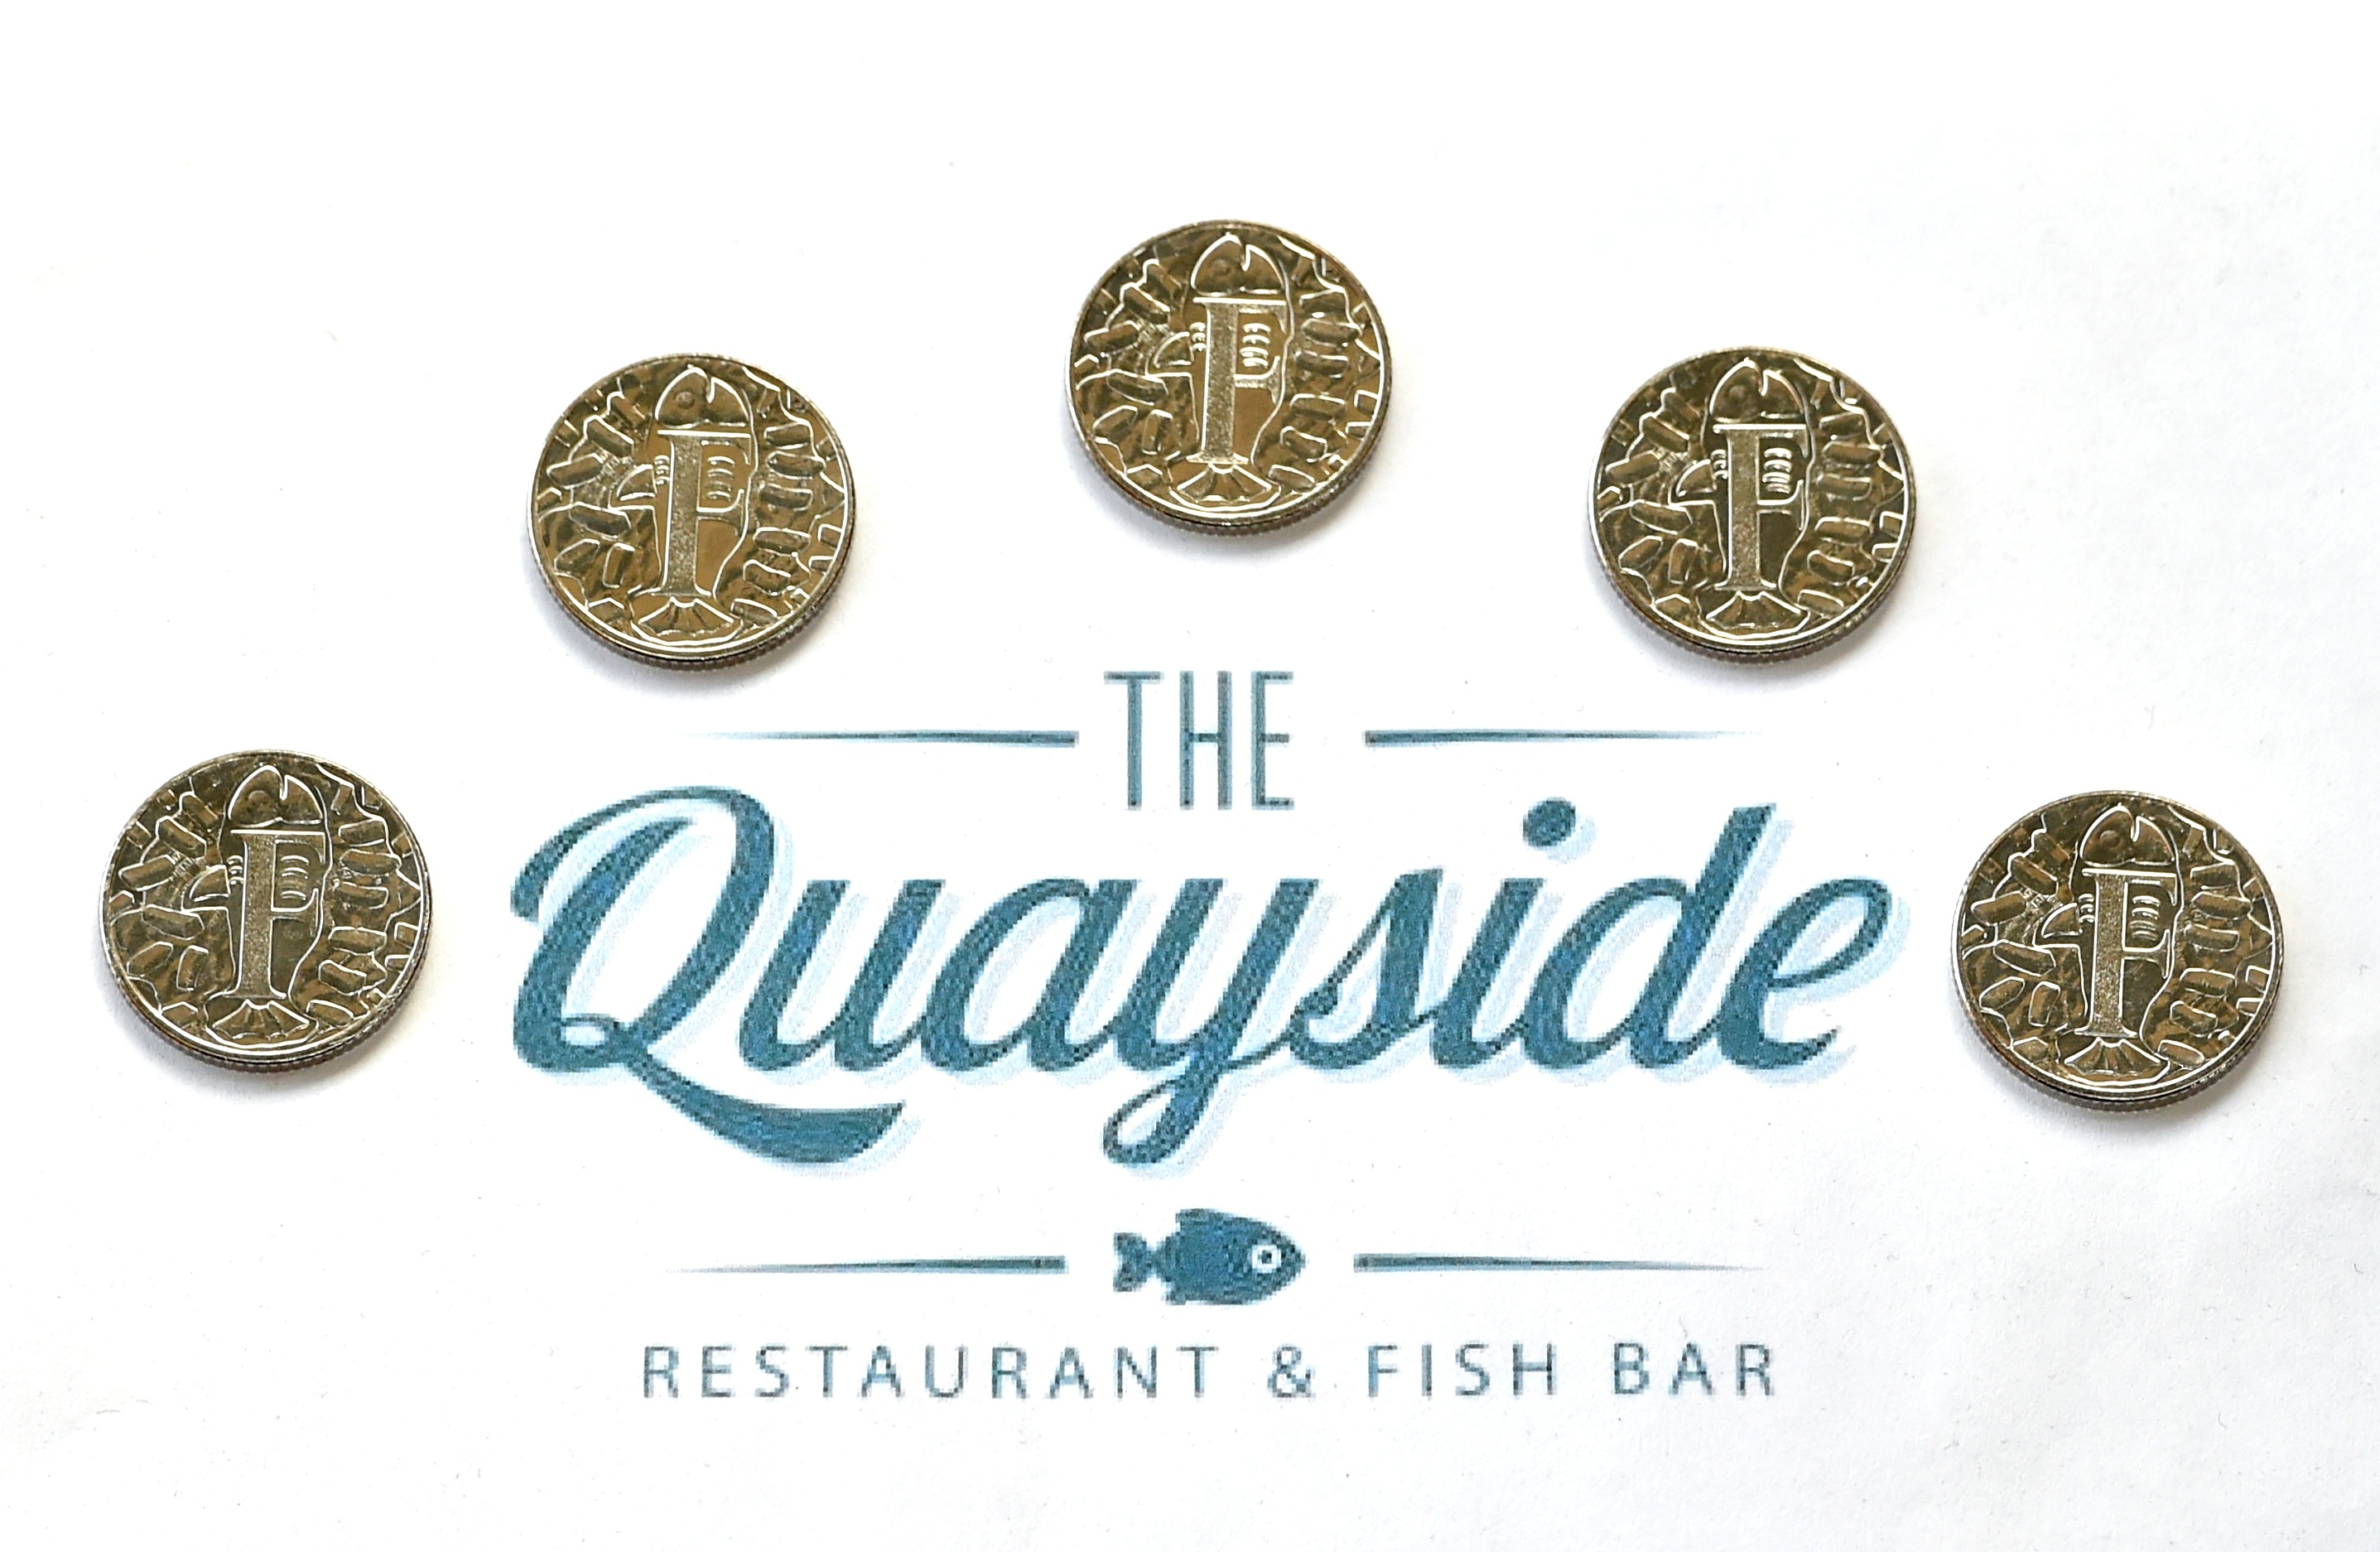 The Quayside Chip Shop has been chosen to help distribute the limited edition 10p FishnChips coin.